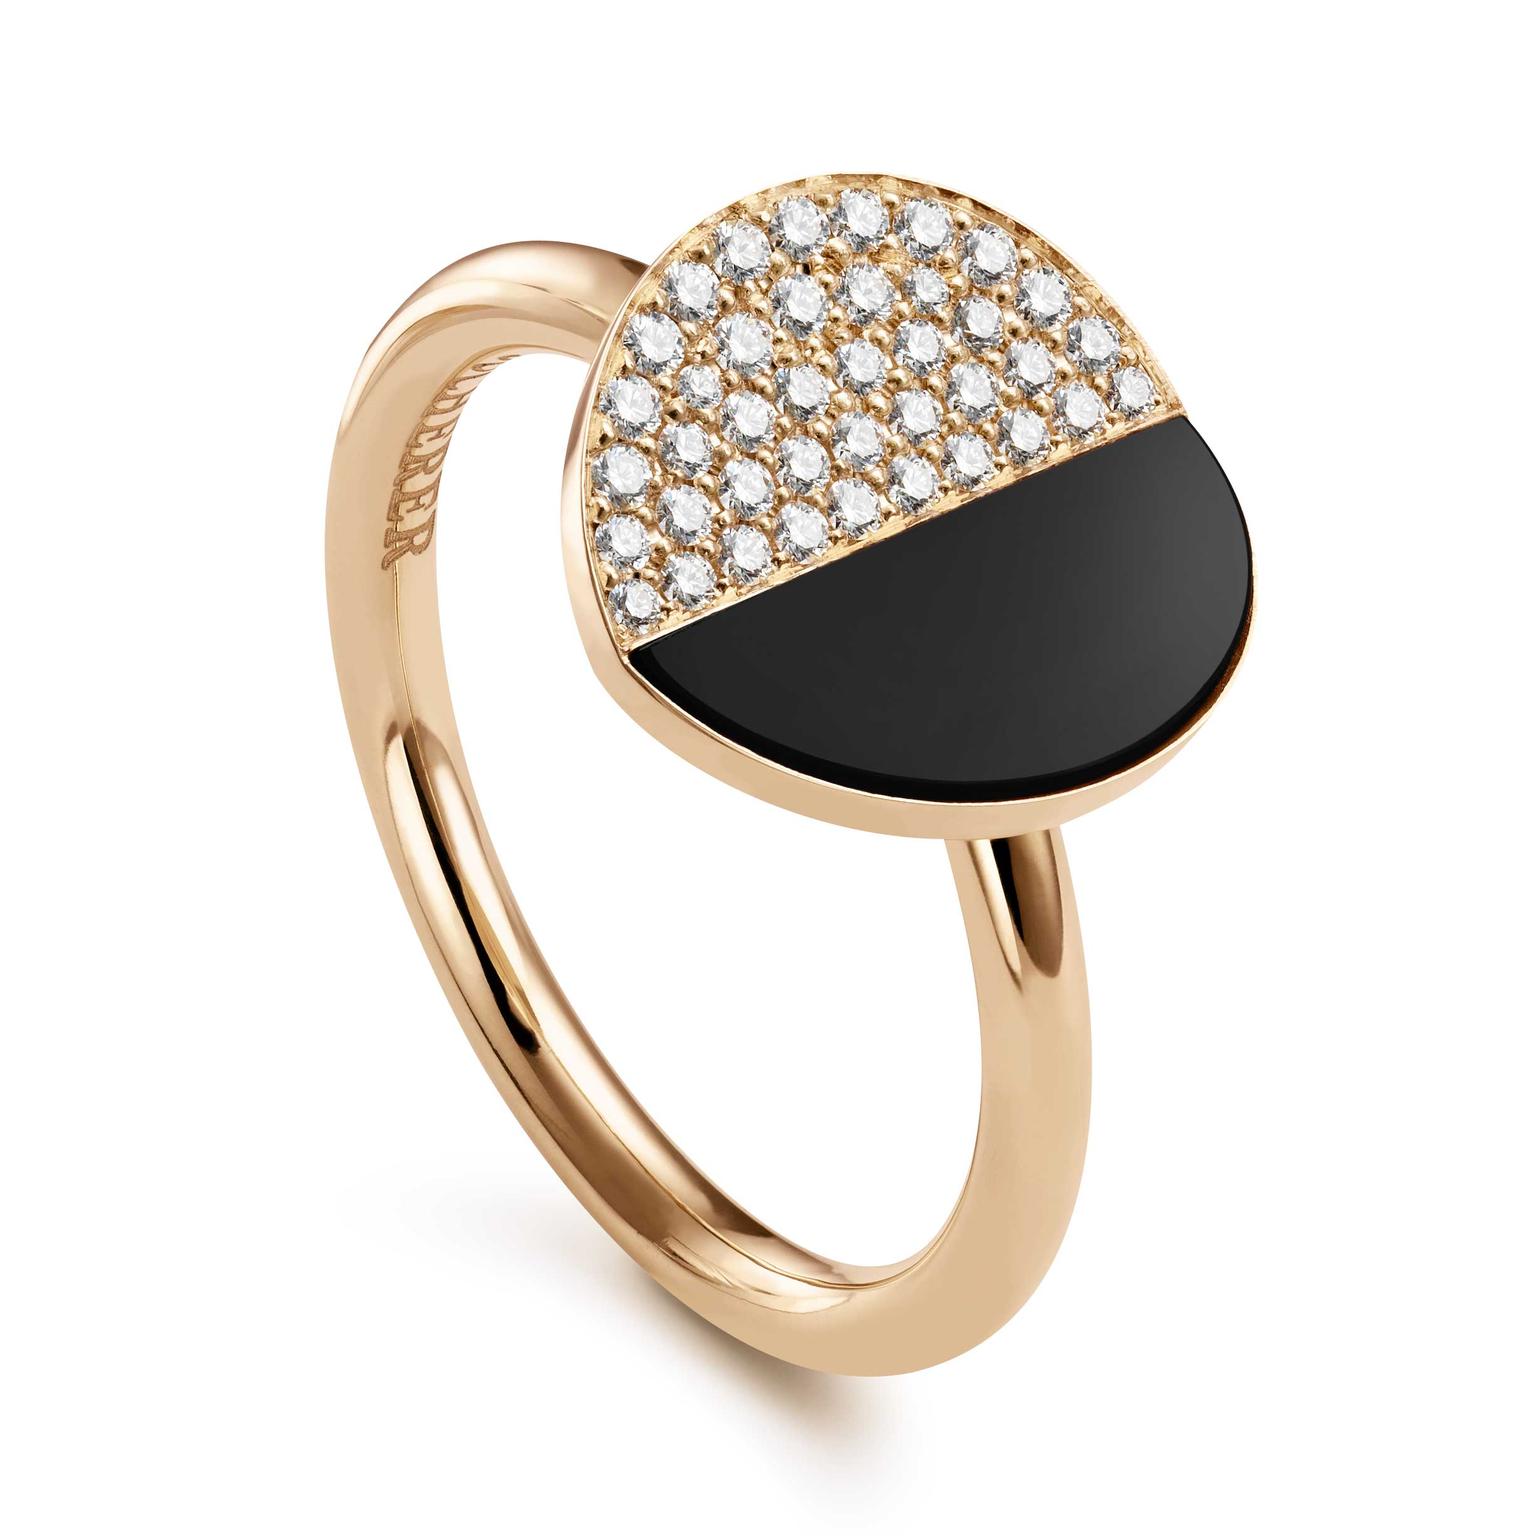 Bucherer B Dimension ring with diamonds and onyx in rose gold Price £1450